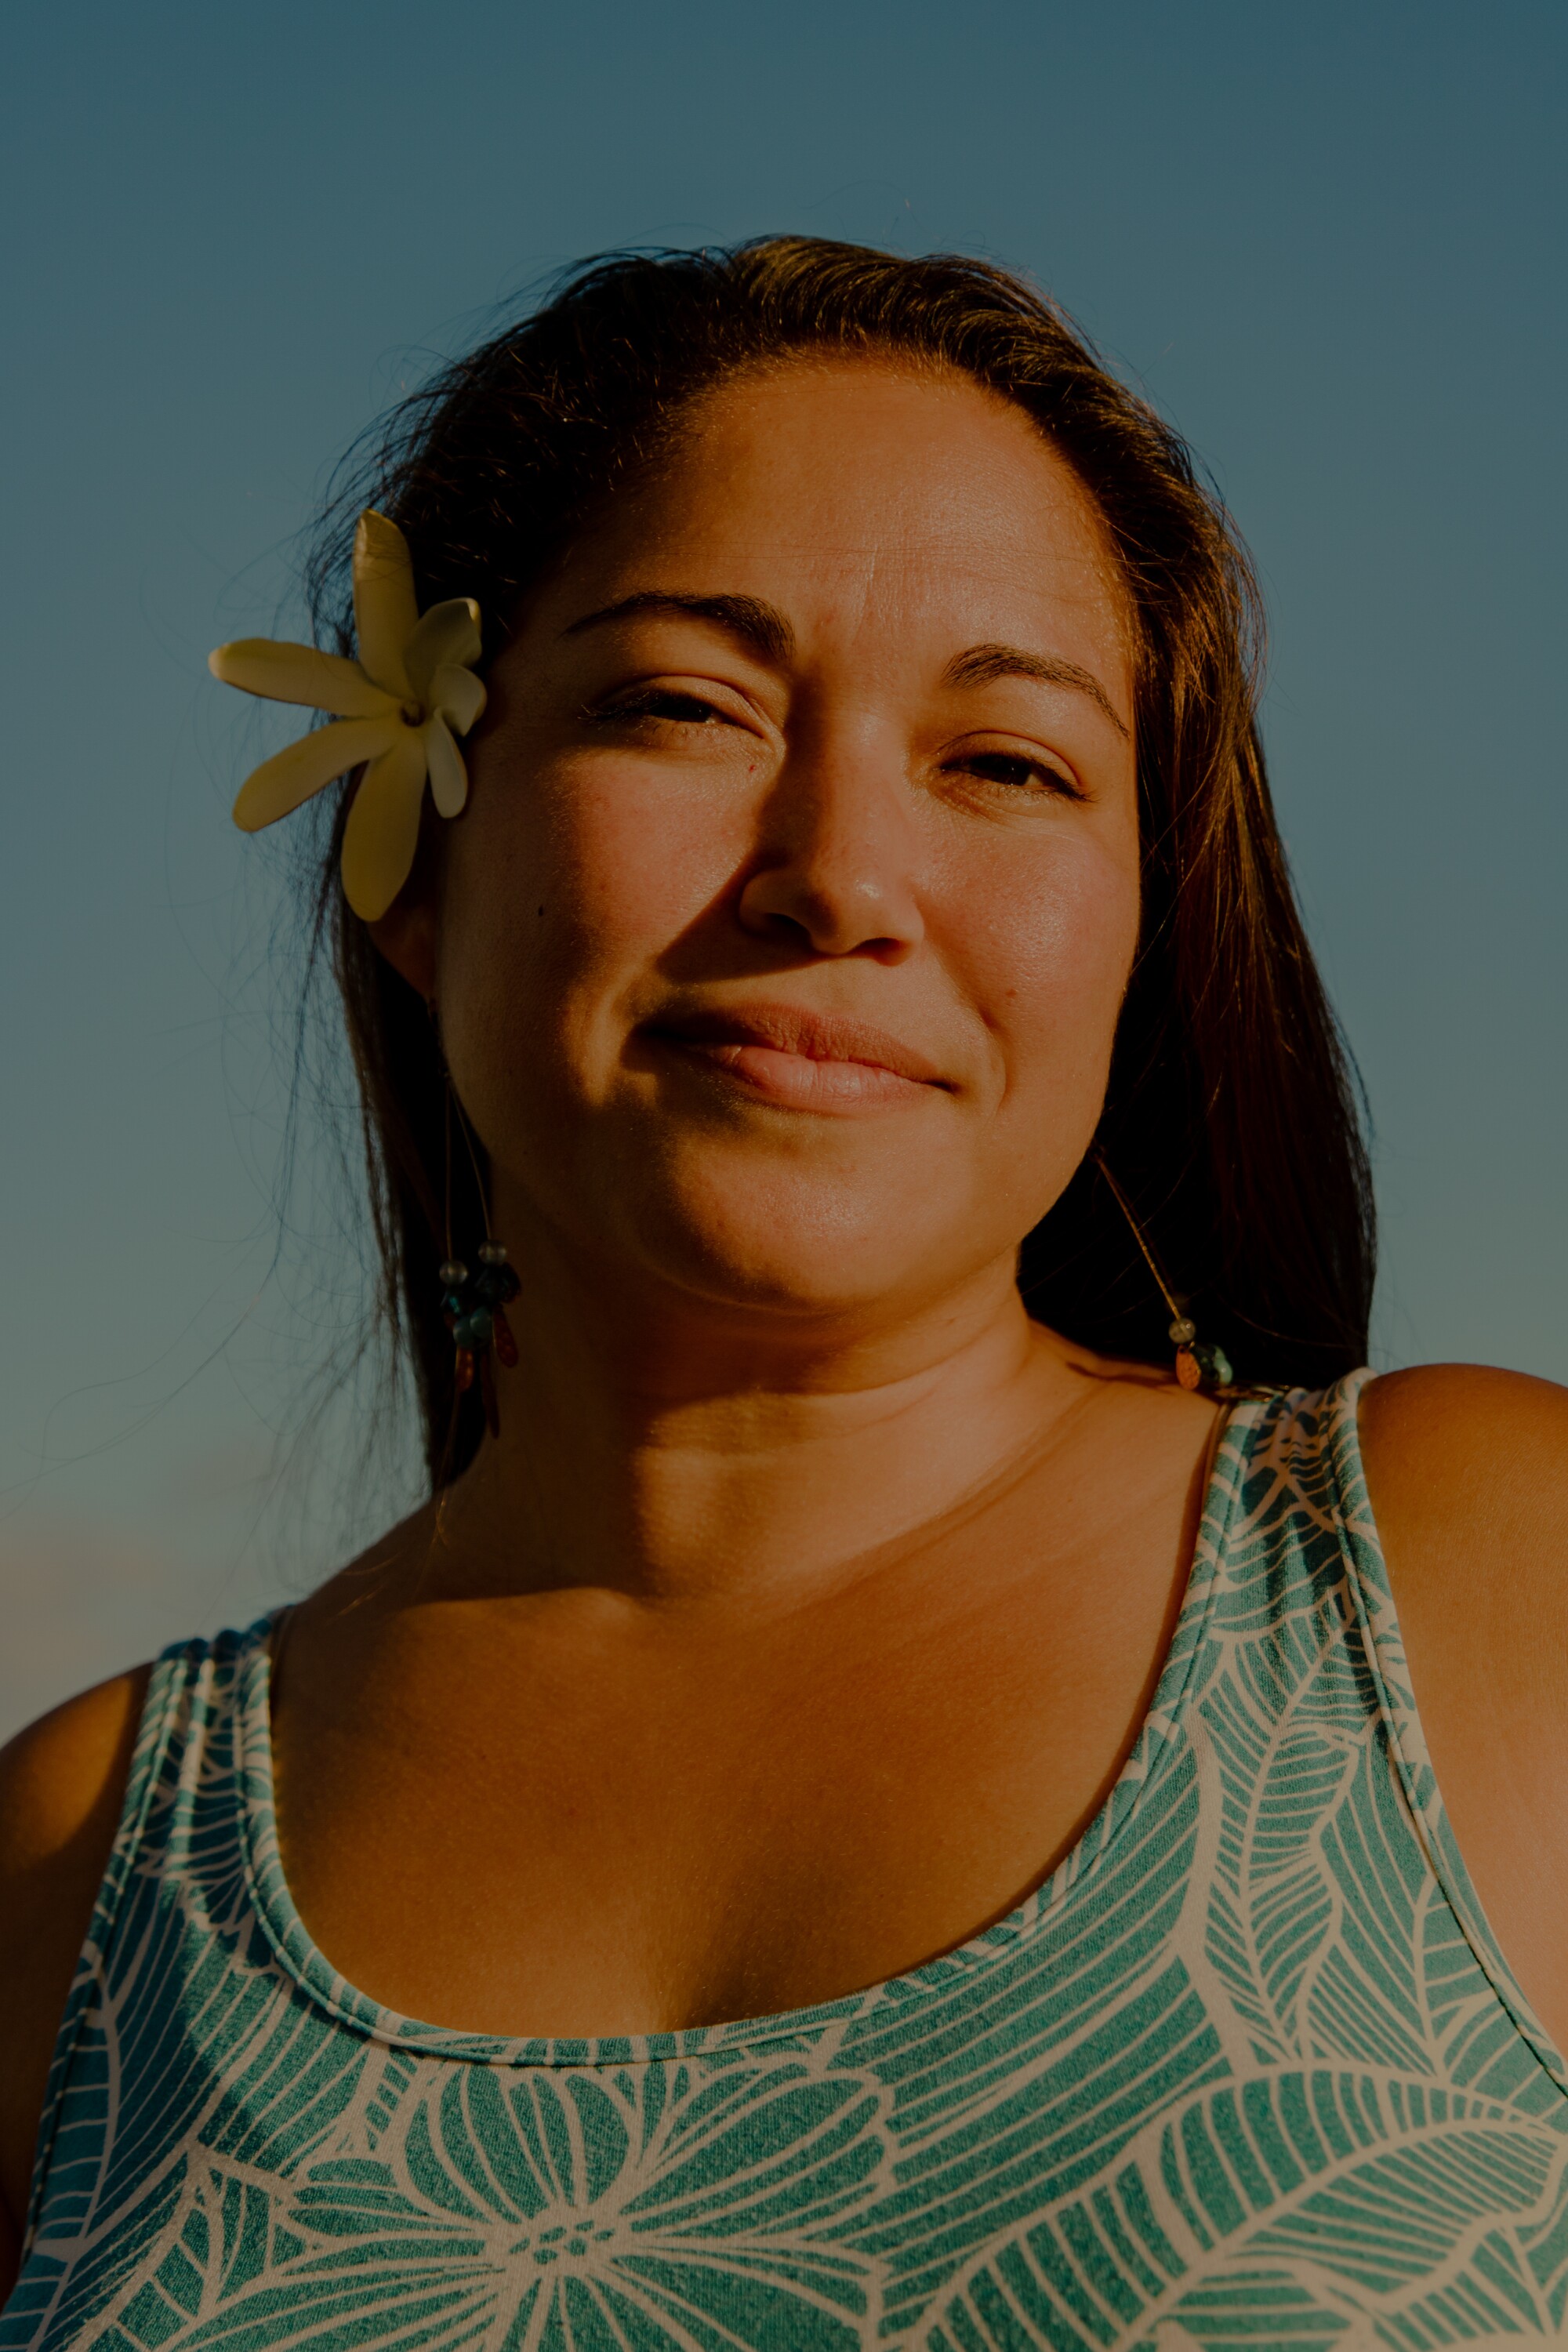 A woman posing in a blue patterned top with a yellow flower in her hair